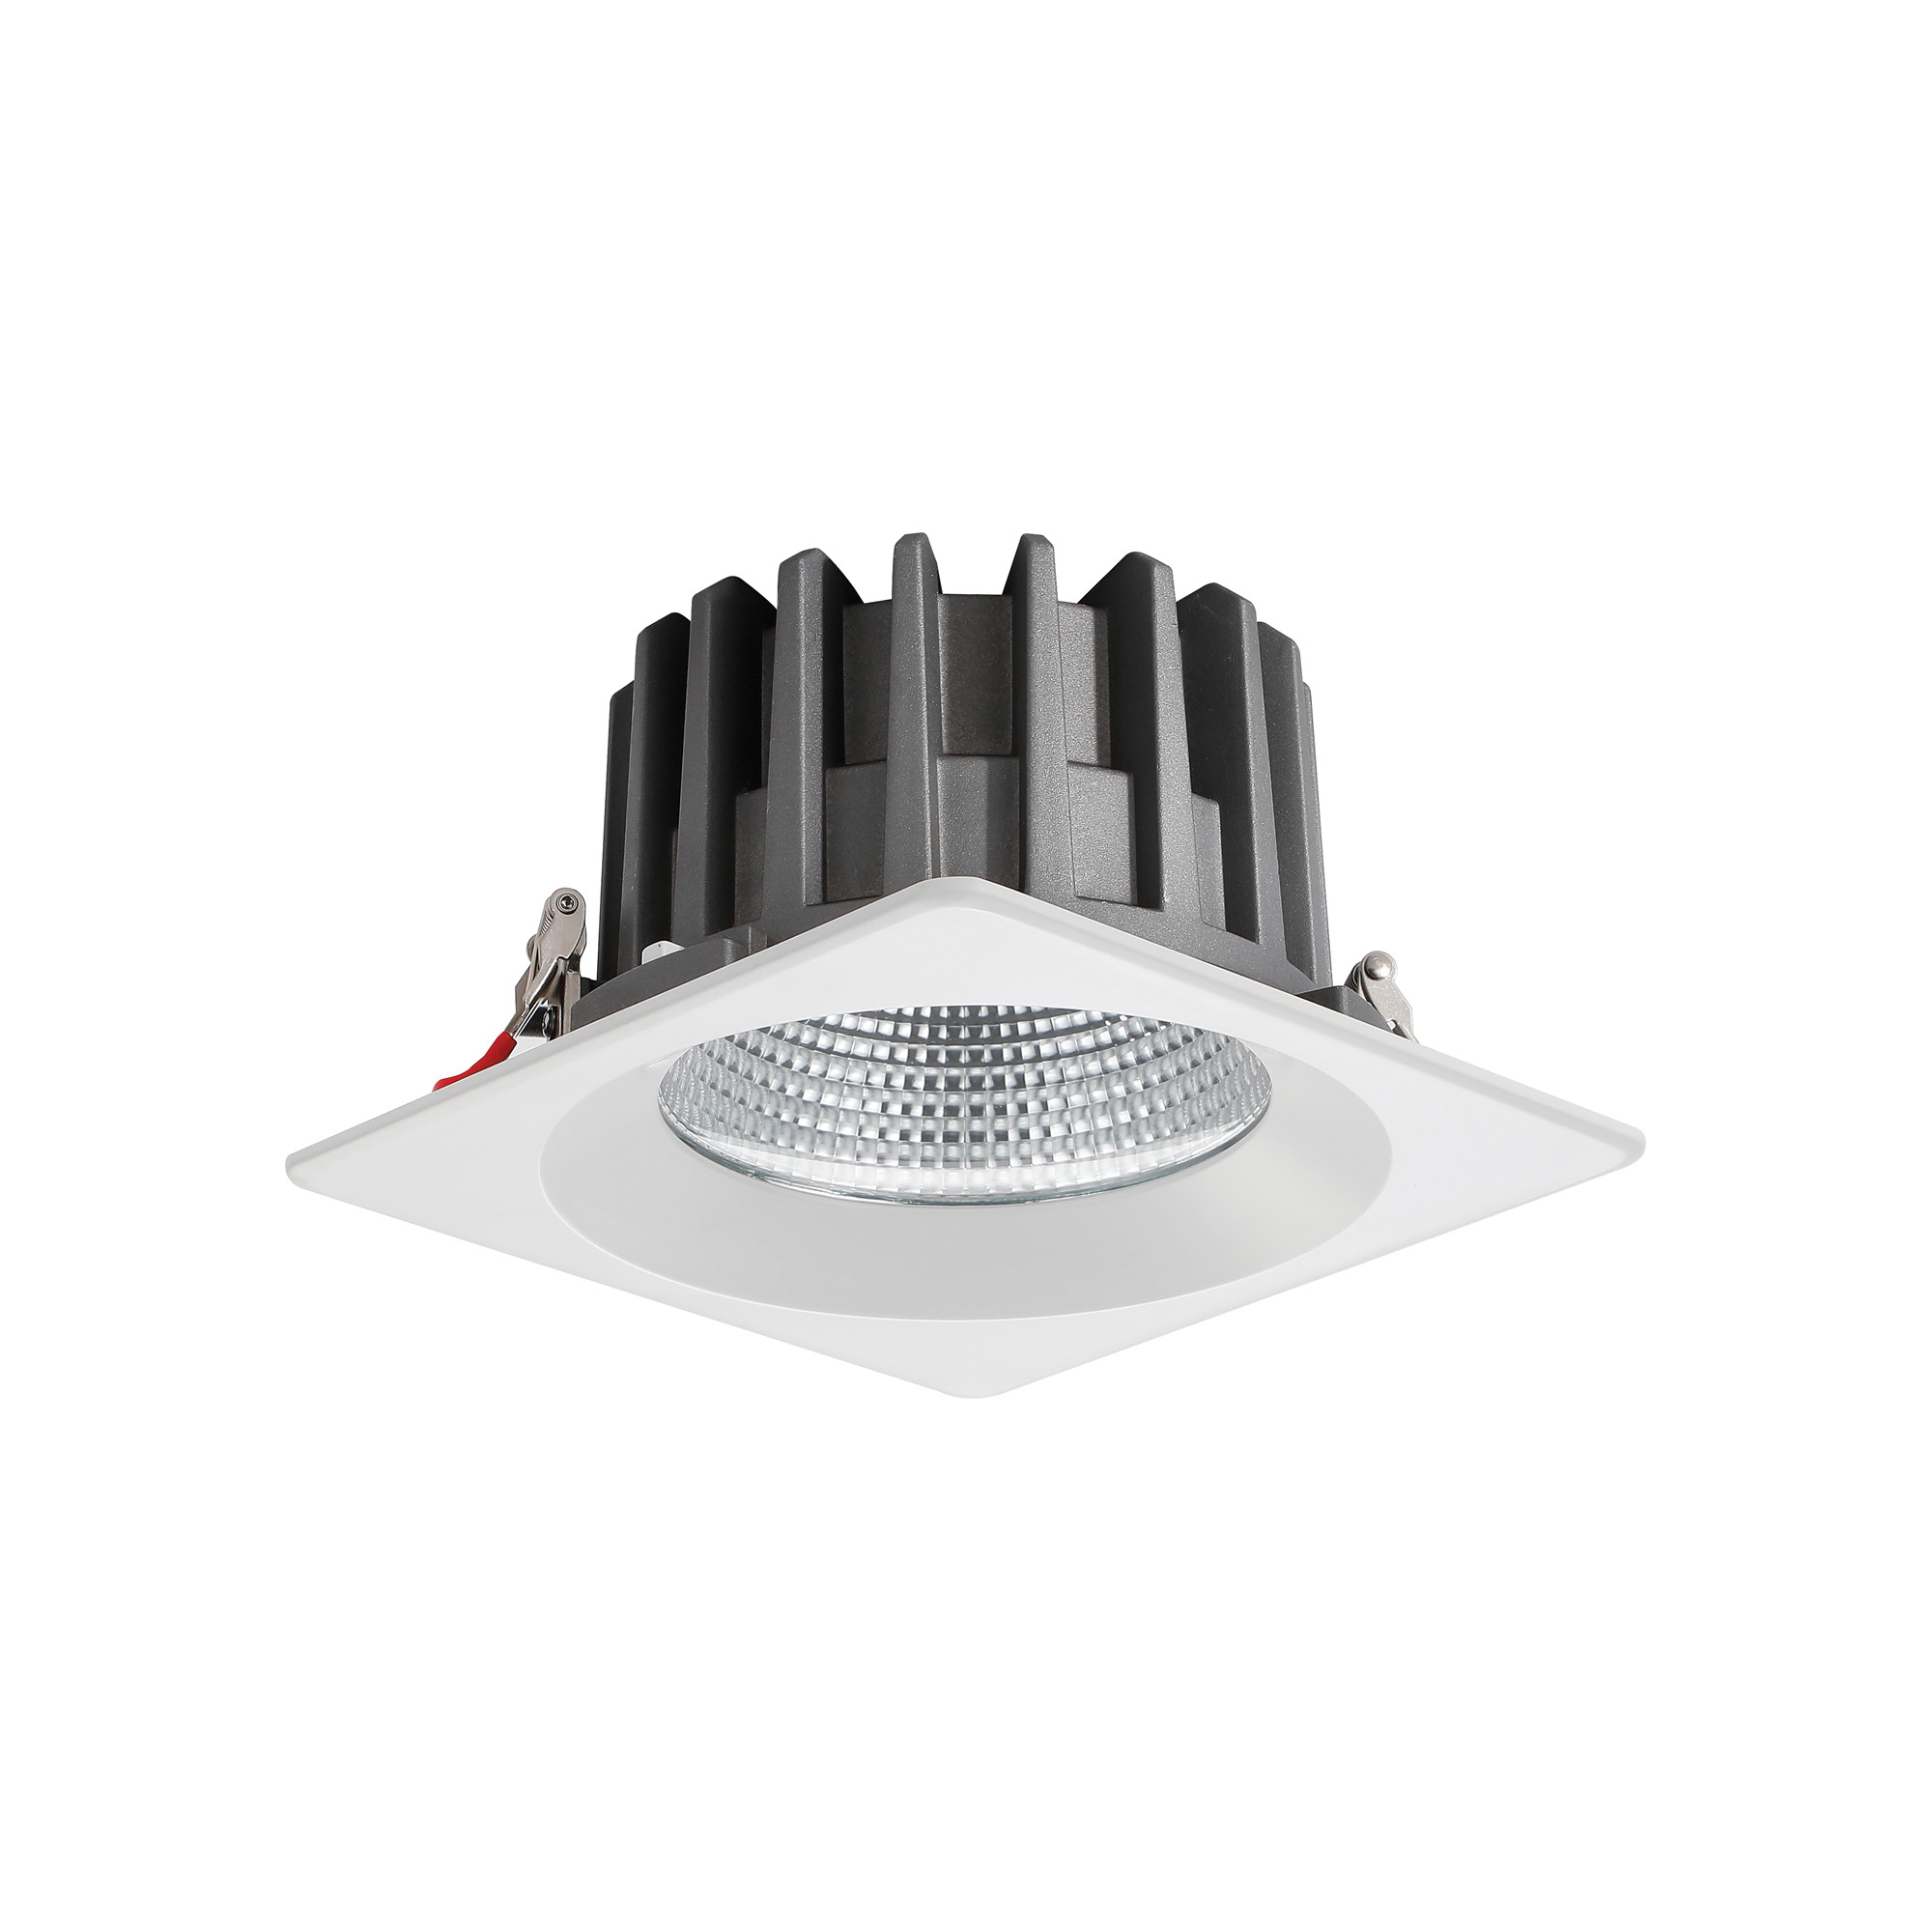 DL200081  Bionic 40, 40W, 1000mA, White Deep Square Recessed Downlight, 3600lm ,Cut Out 175mm, 40° , 5000K, IP44, DRIVER INC., 5yrs Warranty.